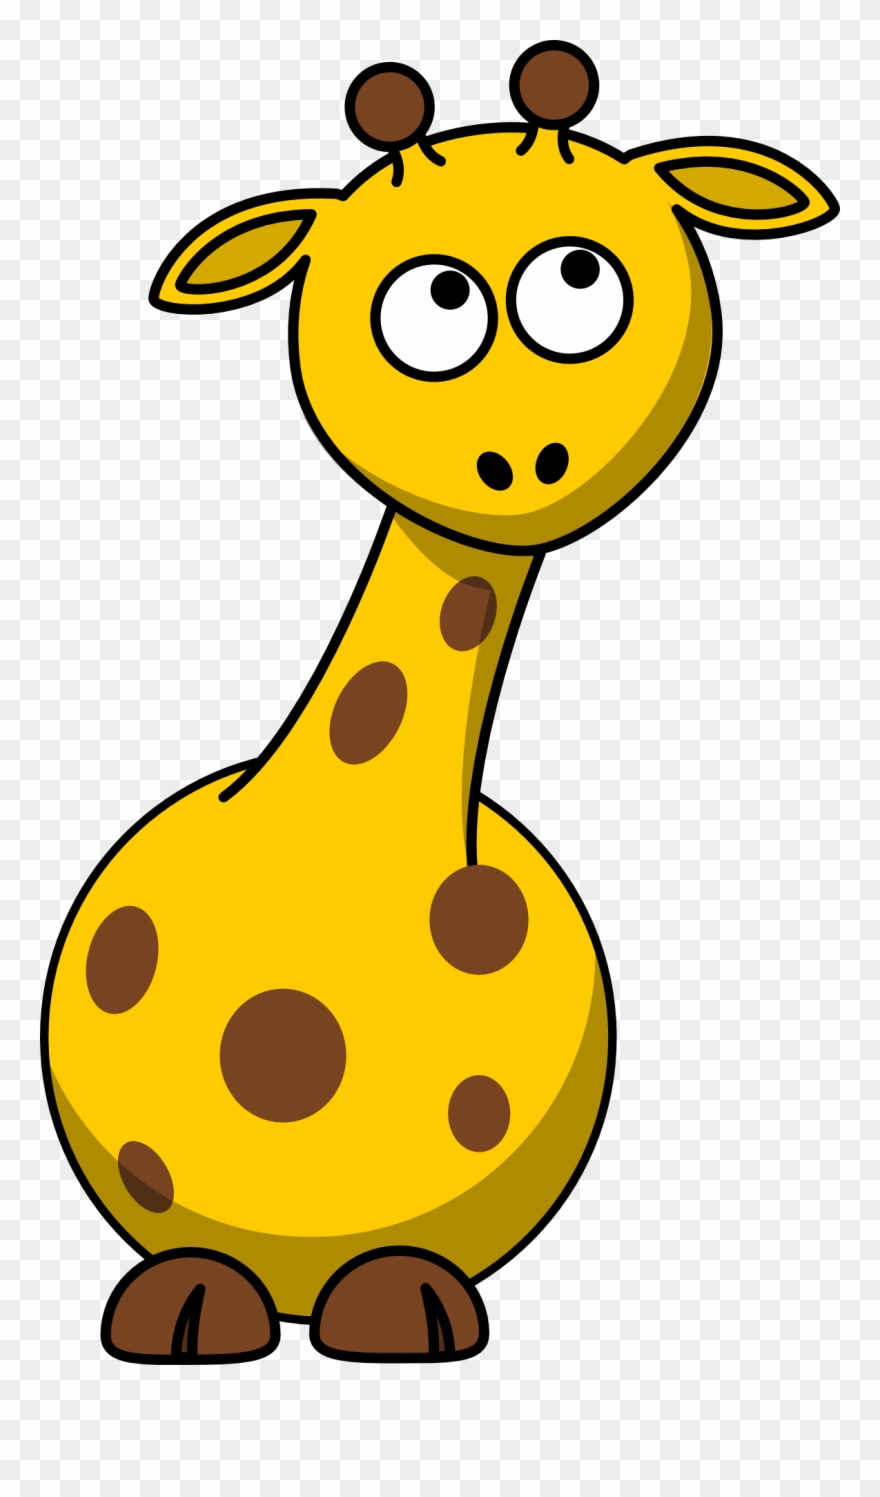 Download Giraffe clipart cartoon pictures on Cliparts Pub 2020!